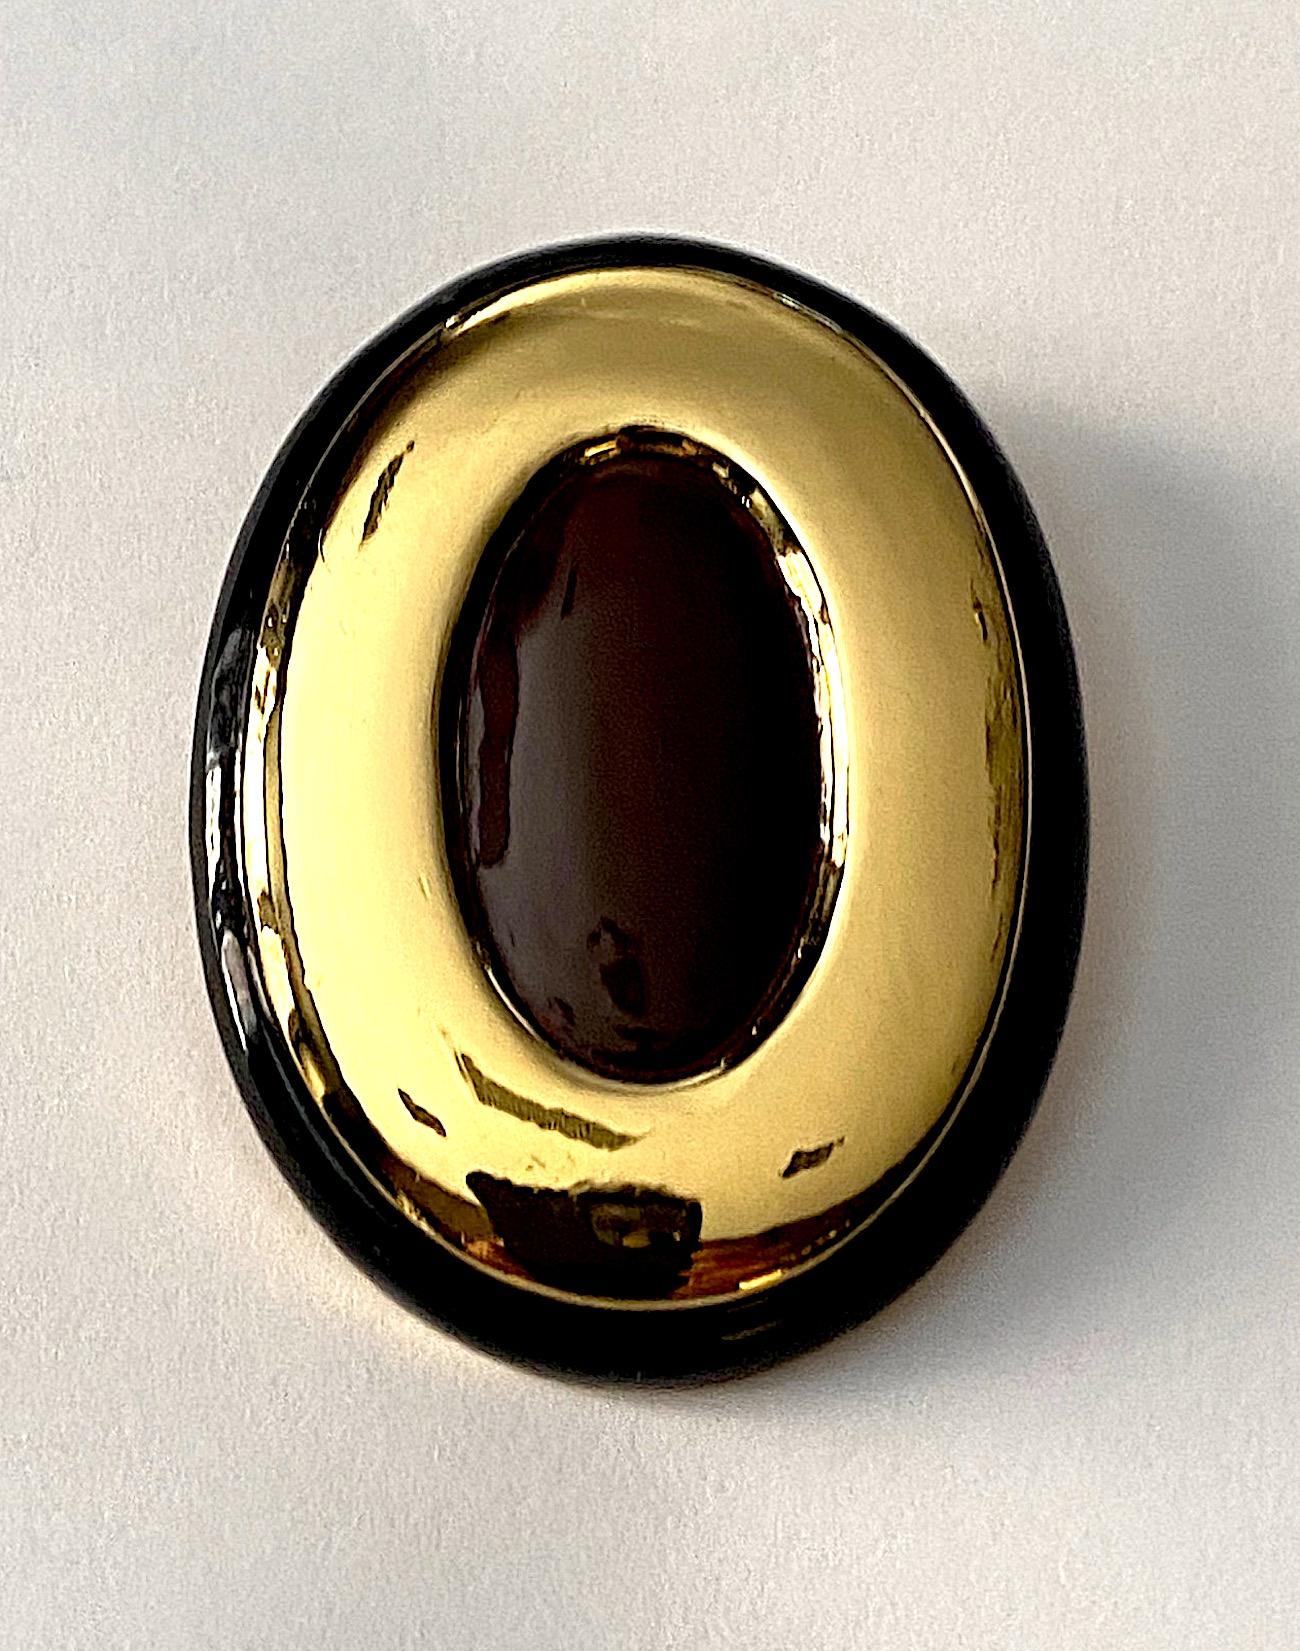 Made in Italy circa 1980 large oval button earrings. The earrings are gold plated with a milk chocolate enamel center and .25 of an inch black enamel border. Each clip back earring measures a large 1.75 inches wide, 2.38 inches tall and has a